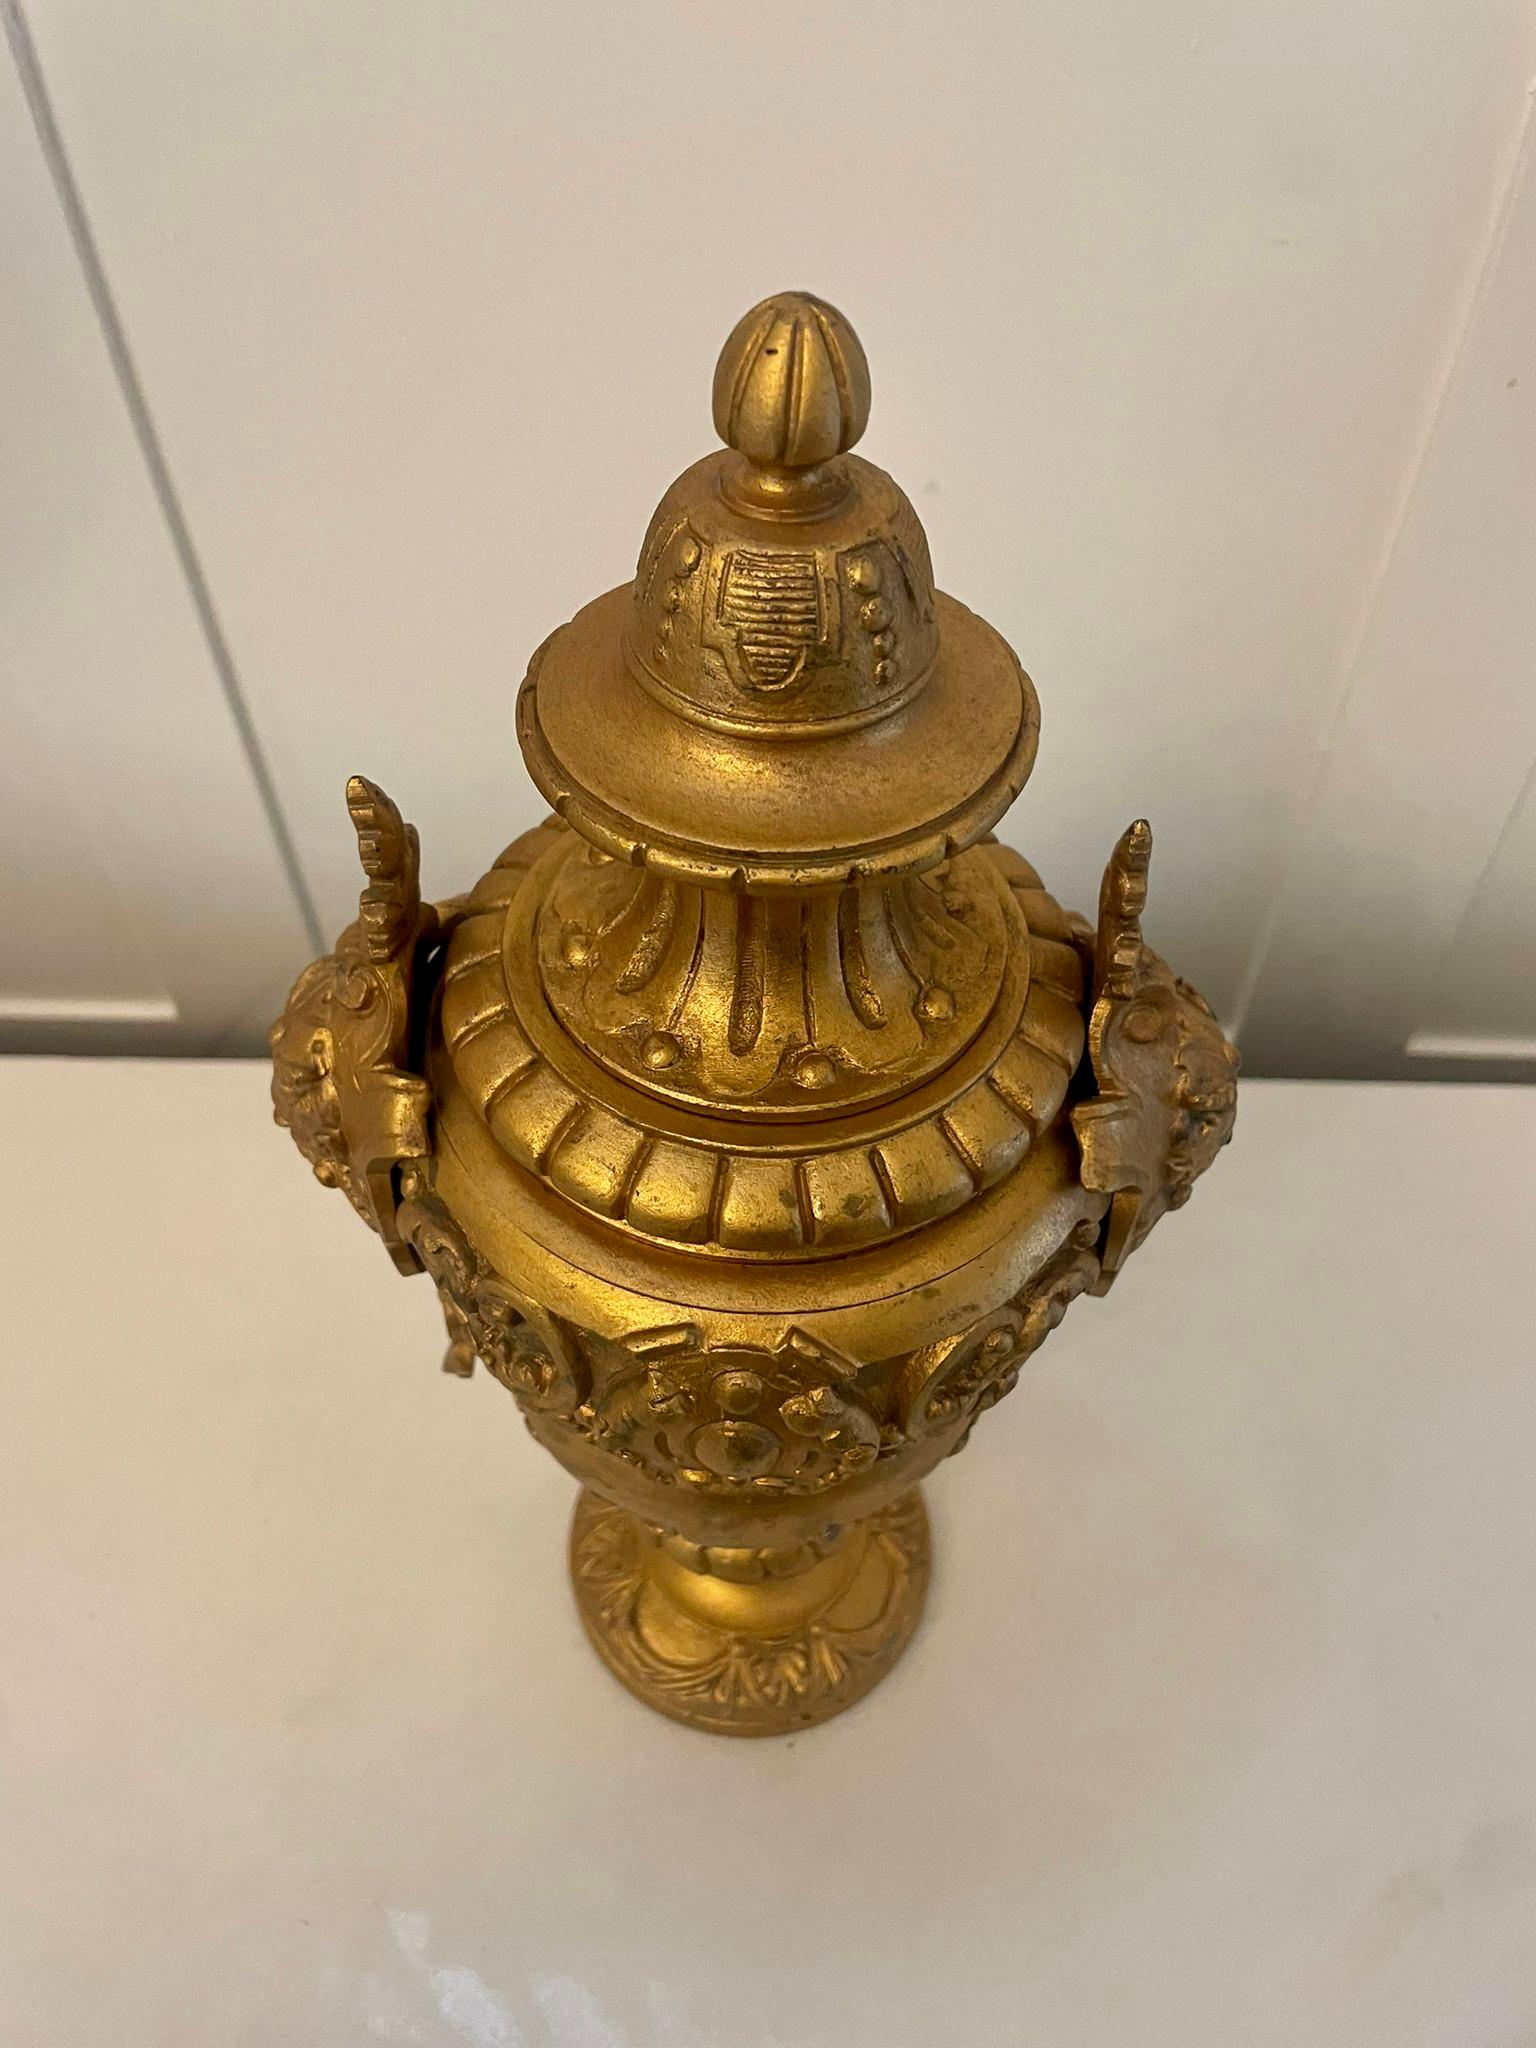 Antique Victorian quality gilded brass urn having an ornate gilded brass urn with swags and scrolls decorated.

A quaint decorative piece

Dimensions:
Height 30 cm ( 11.81 in)
Width 7 cm (2.75 in)
Depth 7 cm (2.75 in)

Dated 1860